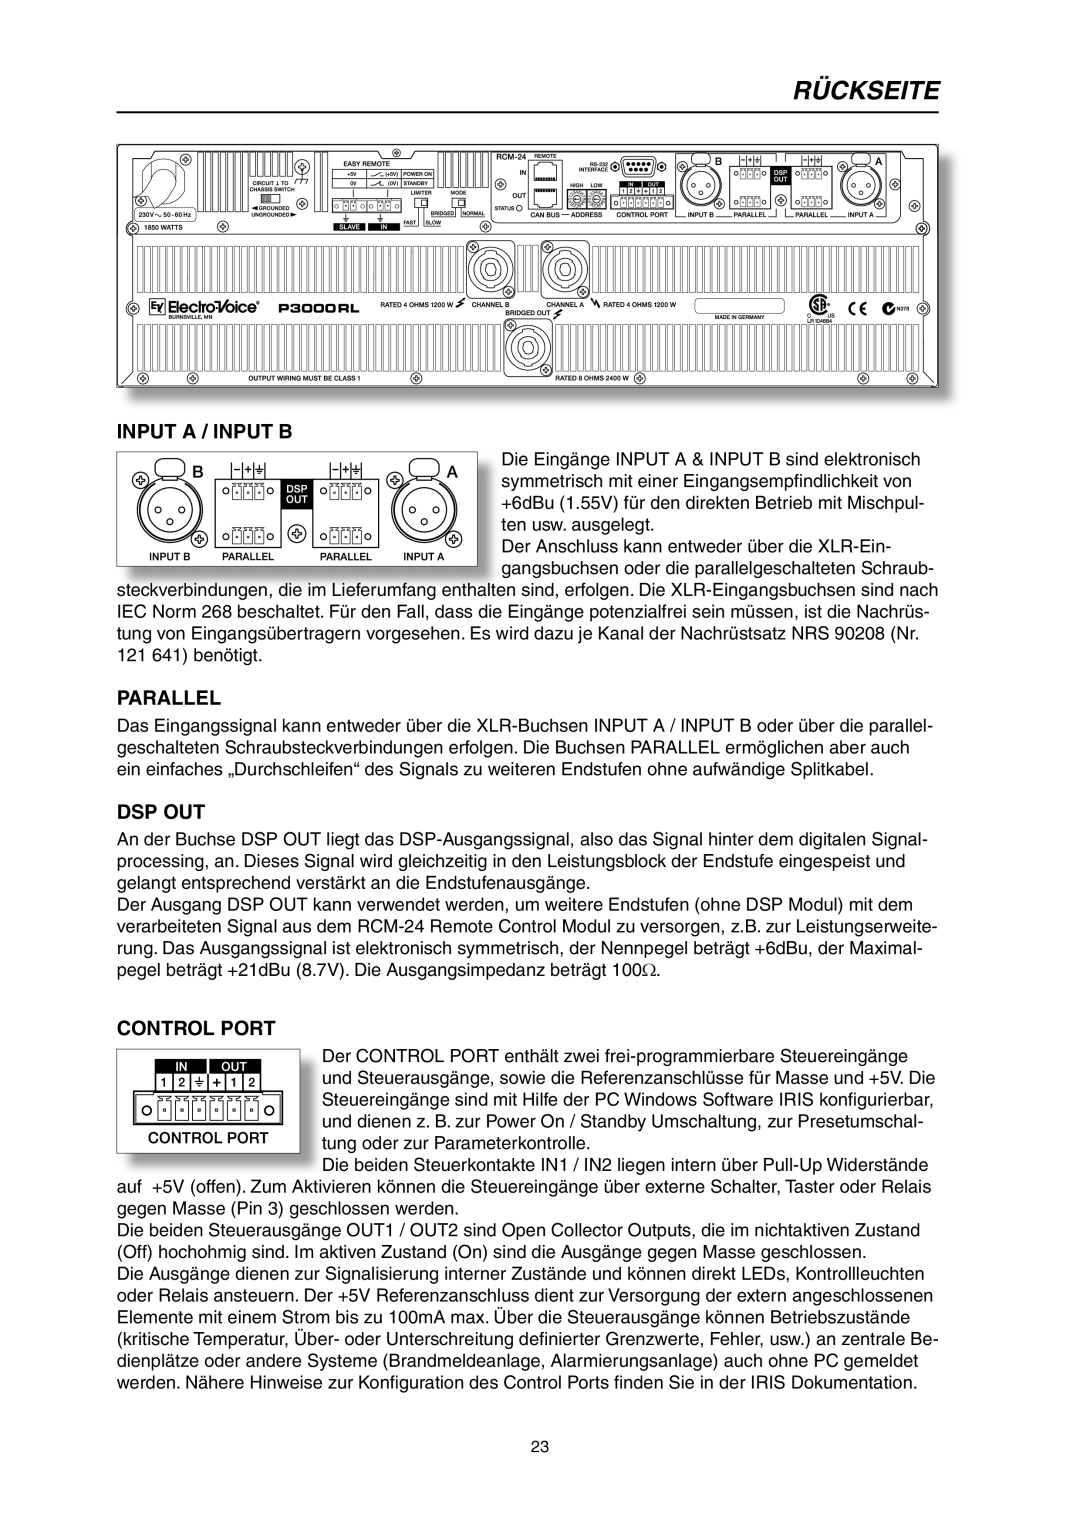 Electro-Voice P3000RL owner manual Rückseite, Input A / Input B, Parallel, Dsp Out, Control Port 